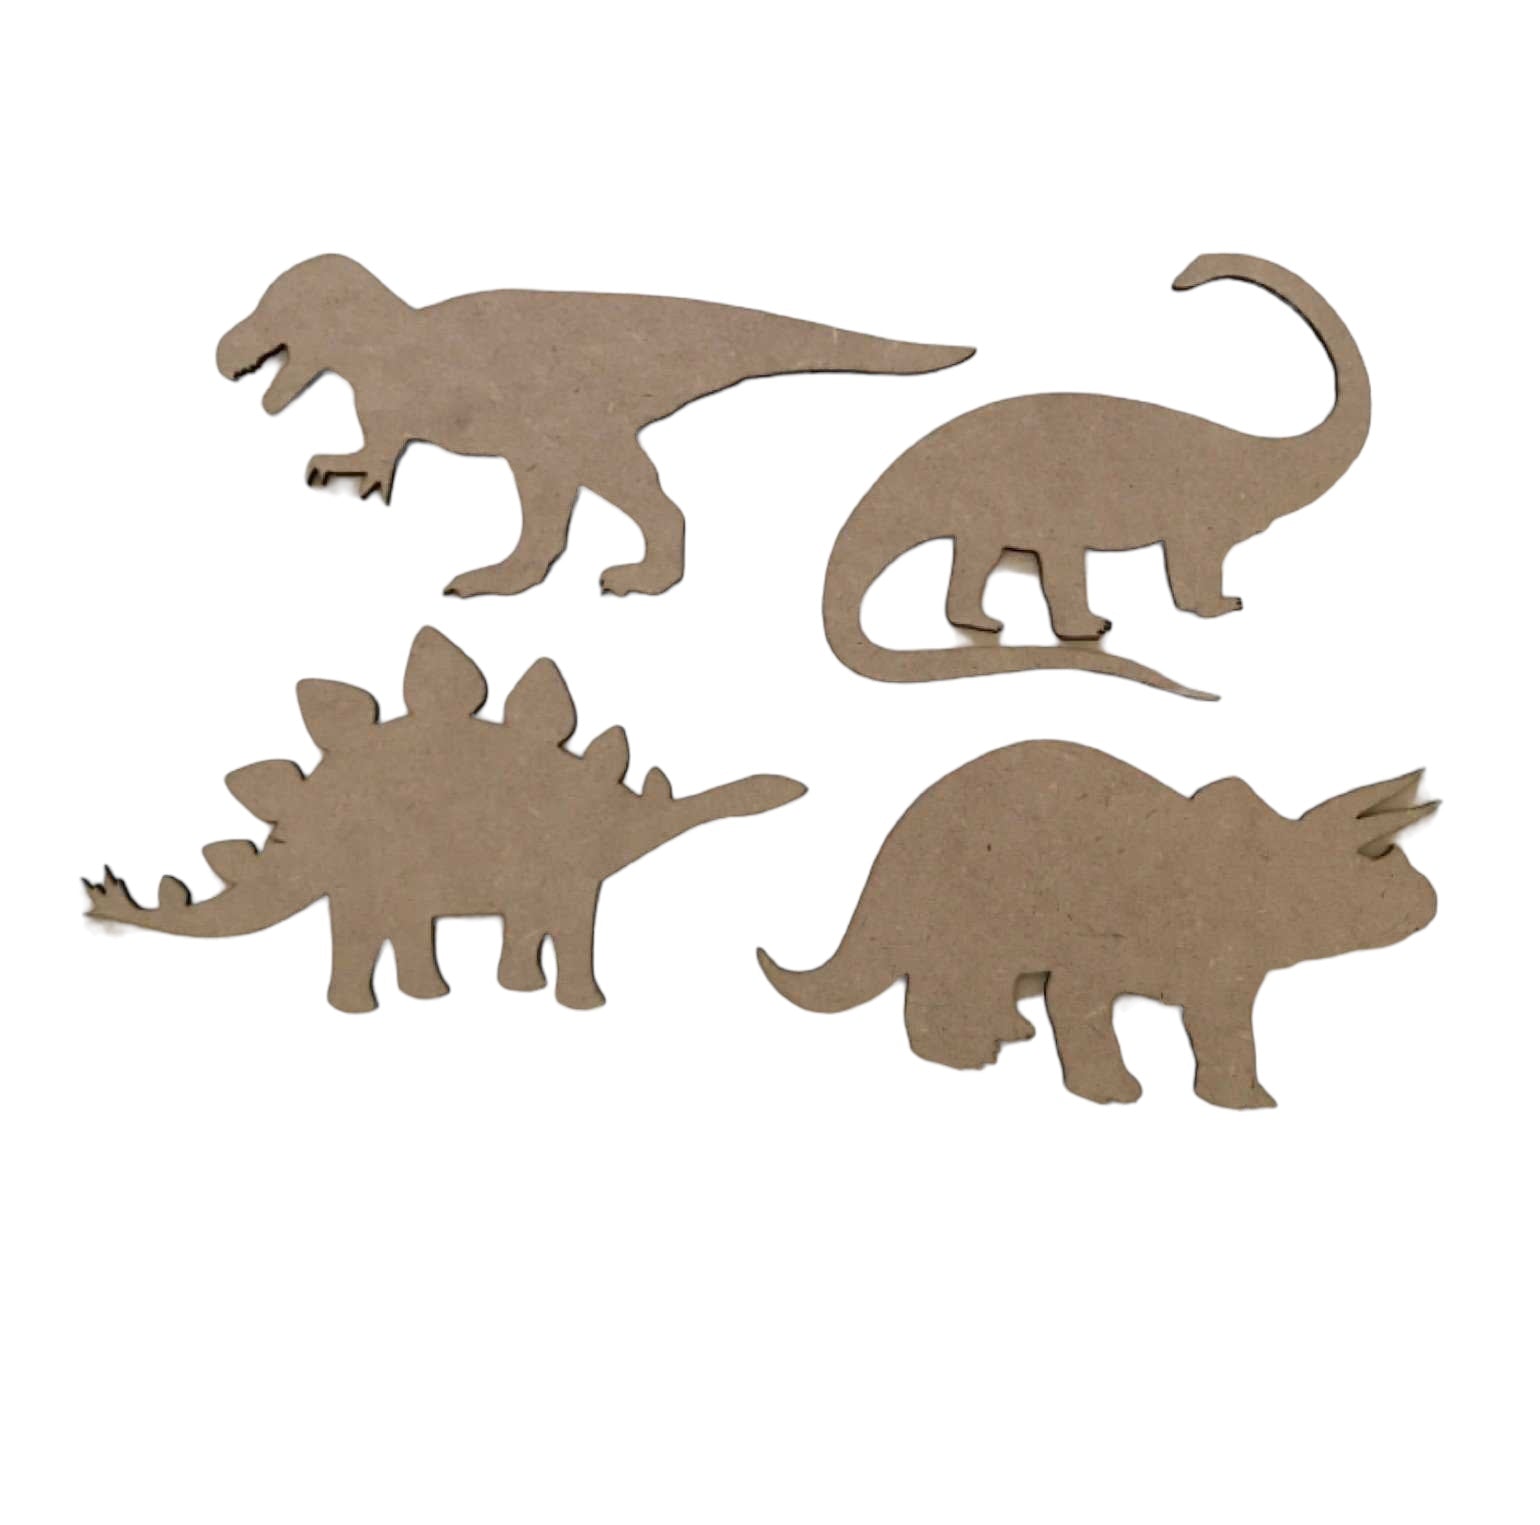 Dinosaur Set of 4 Timber MDF Raw DIY - The Renmy Store Homewares & Gifts 